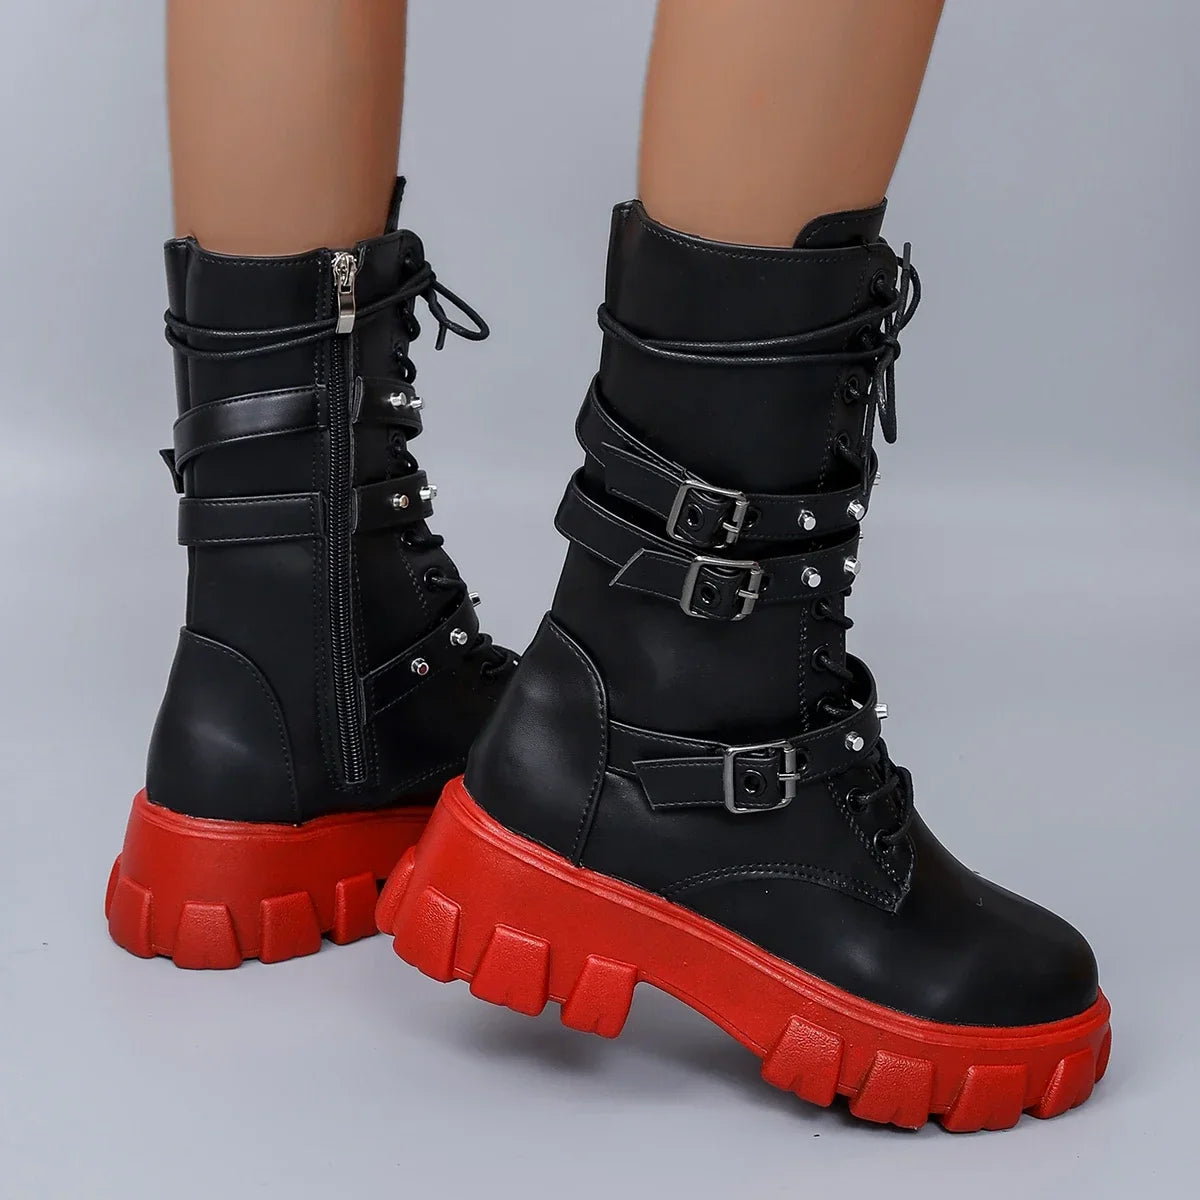 Canmol Big Red Punk Boots with Belt Buckle and Side Zipper